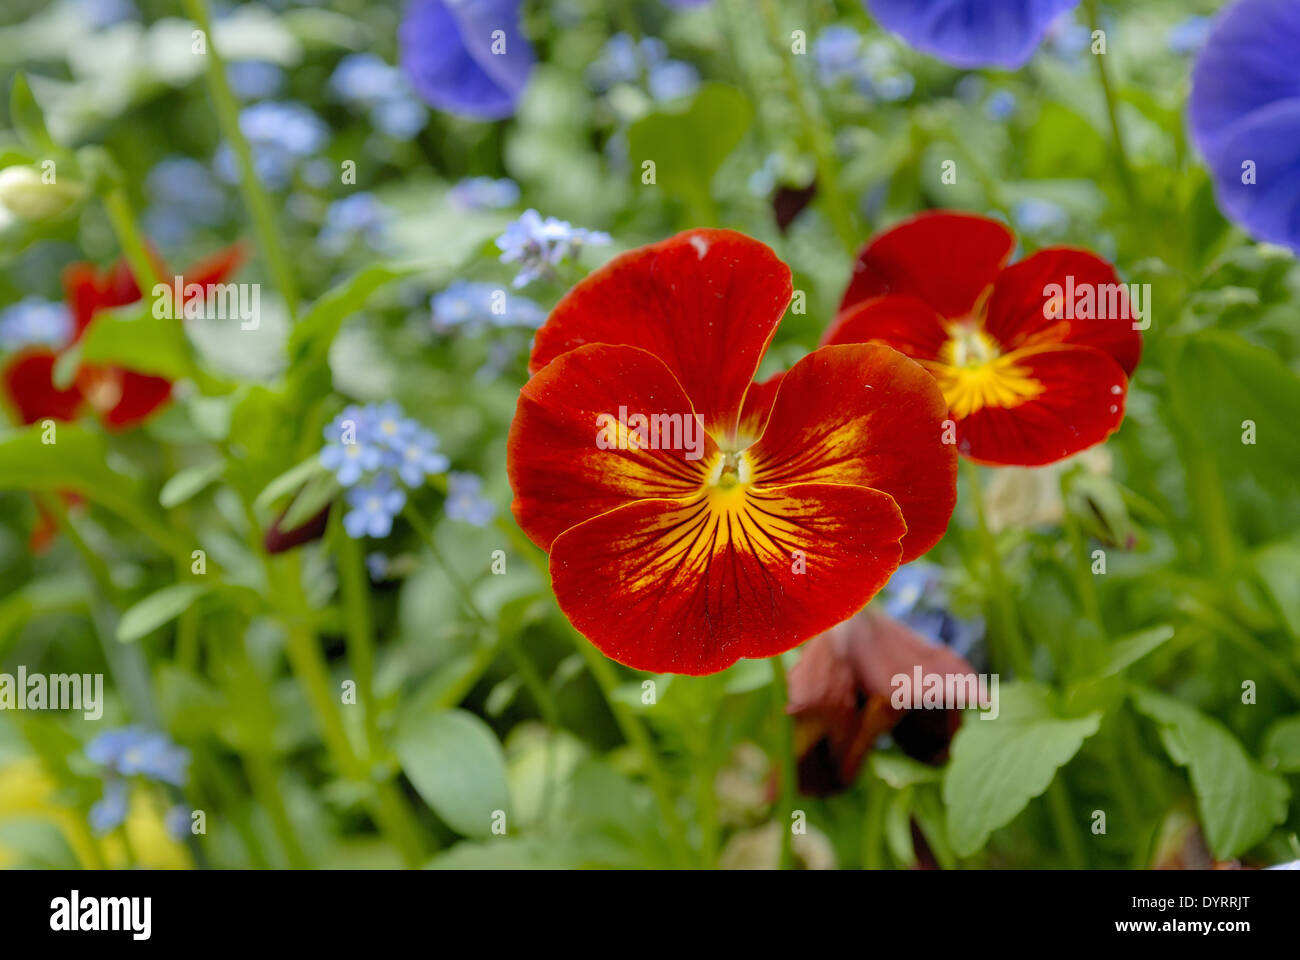 flower bed of colourful pansies Stock Photo